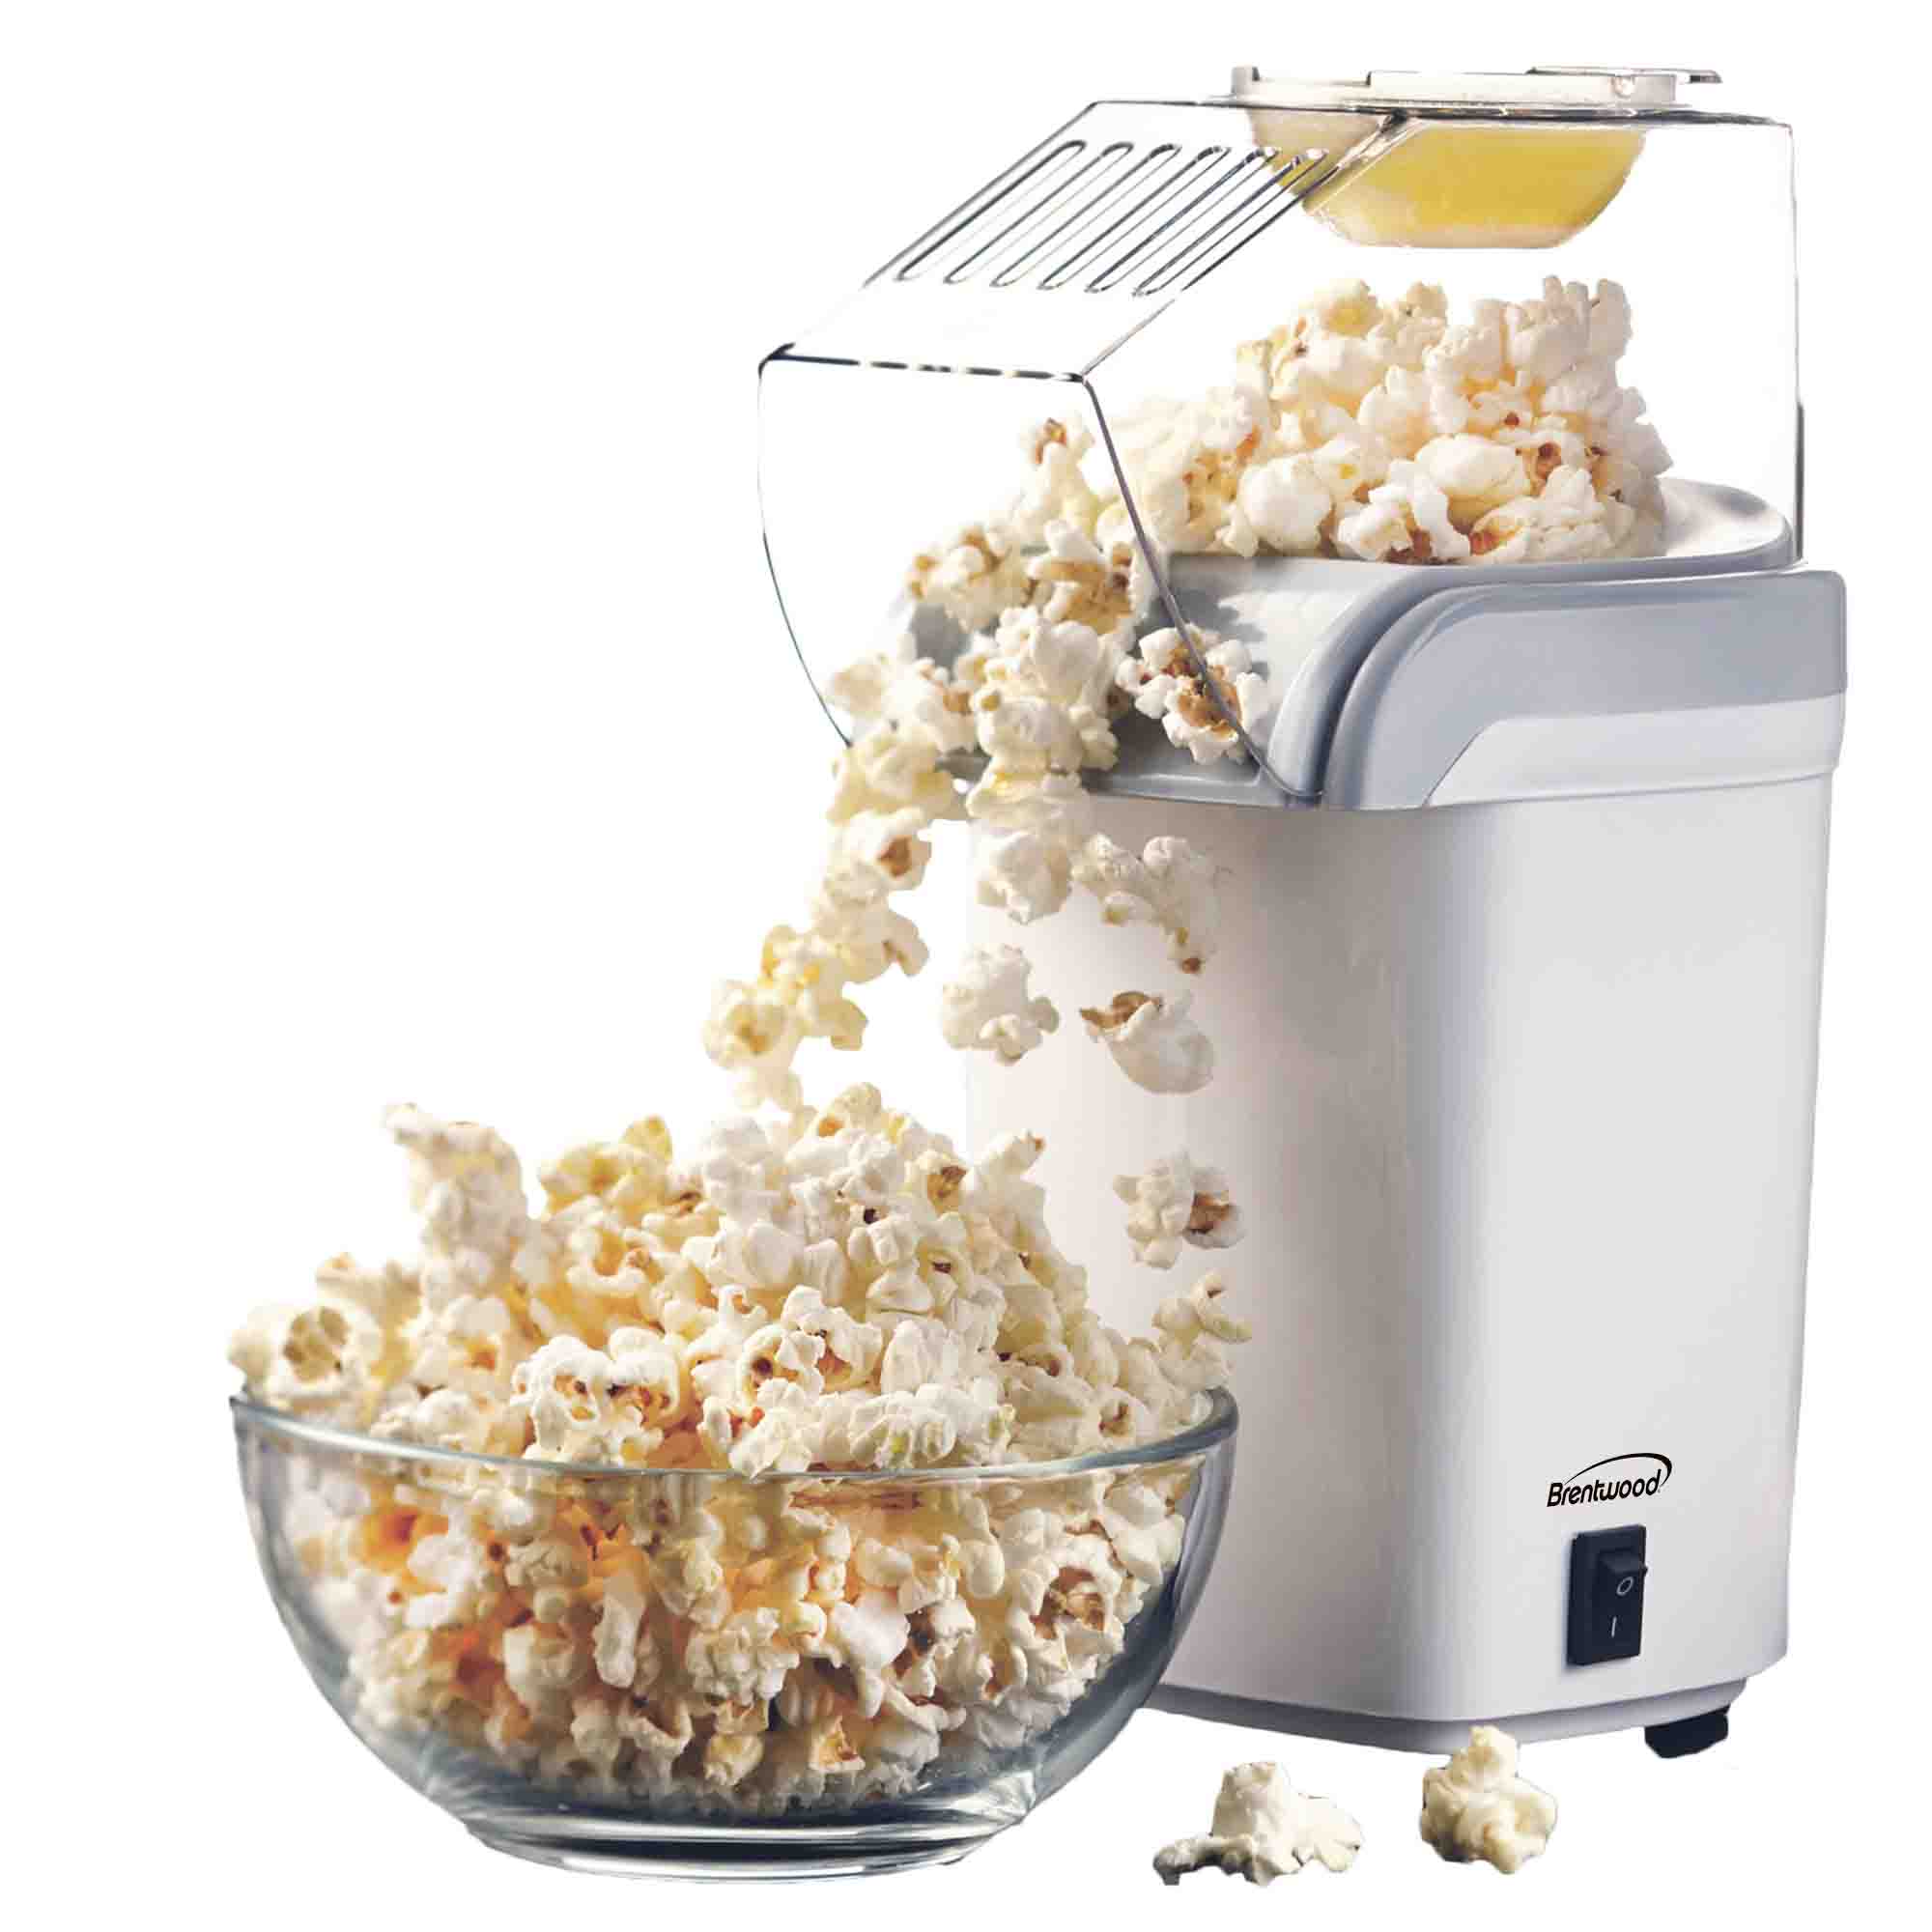 Brentwood PC-486W 8-Cup Hot Air Popcorn Maker, White